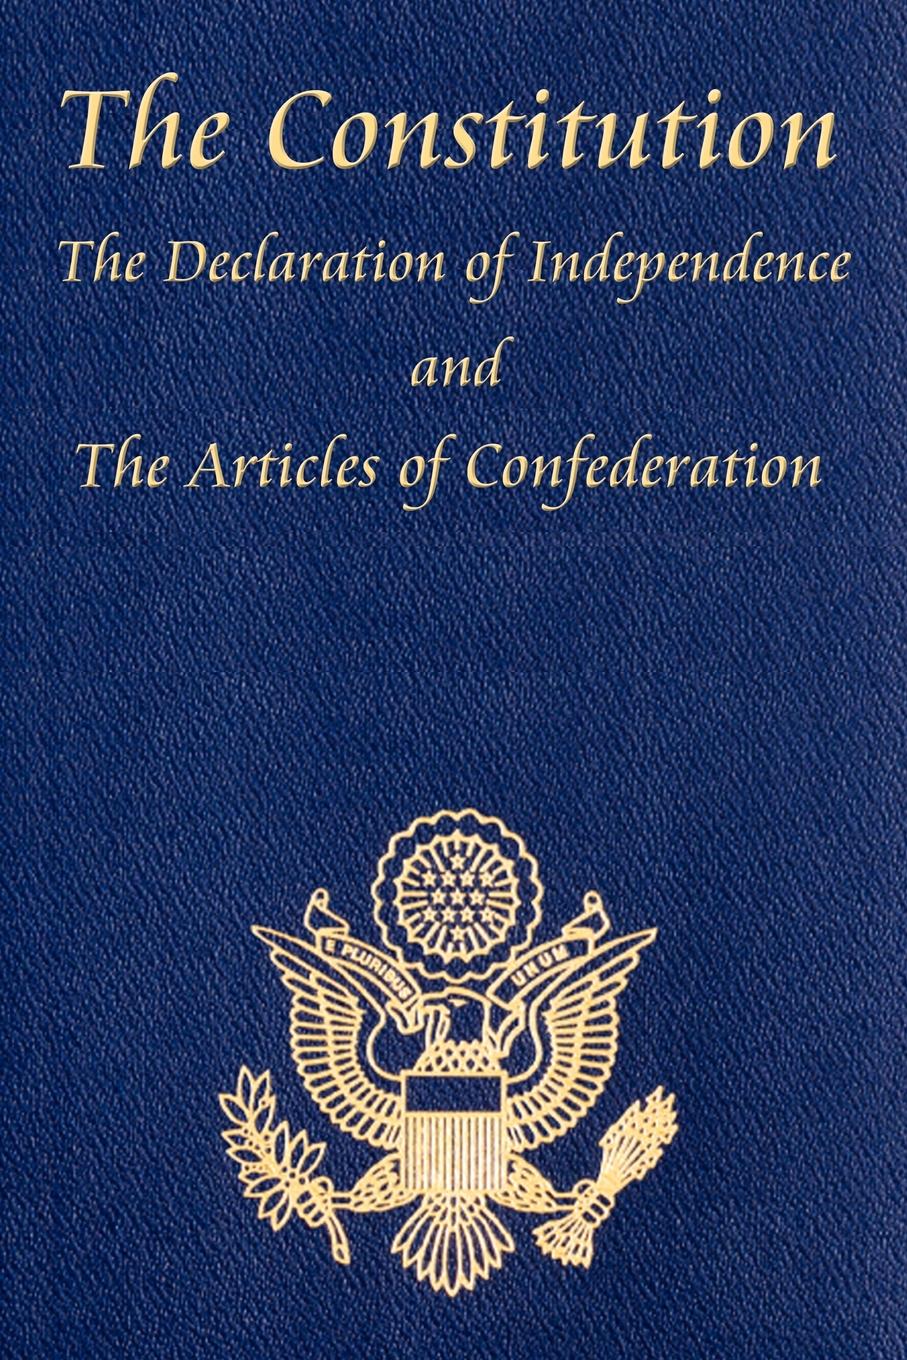 Cover art for The US Constitution, The Declaration of Independence, and The Articles of Confederation.